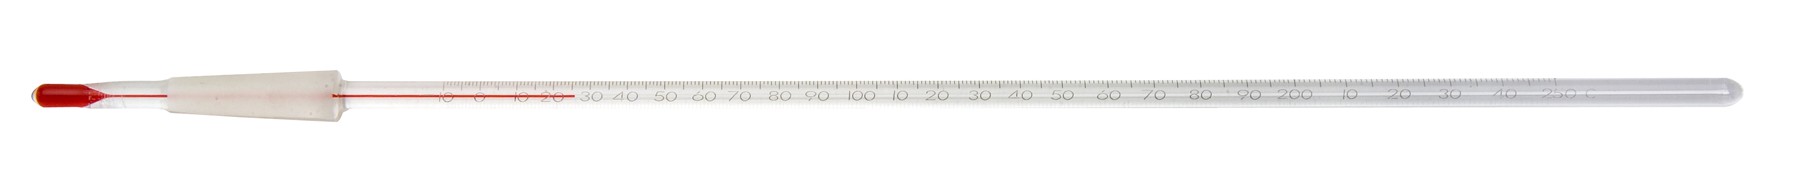 SP Bel-Art, H-B DURAC 10/30 Ground Joint Liquid-In-Glass Thermometer; -10 to 150C, 25mm Immersion, Organic Liquid Fill